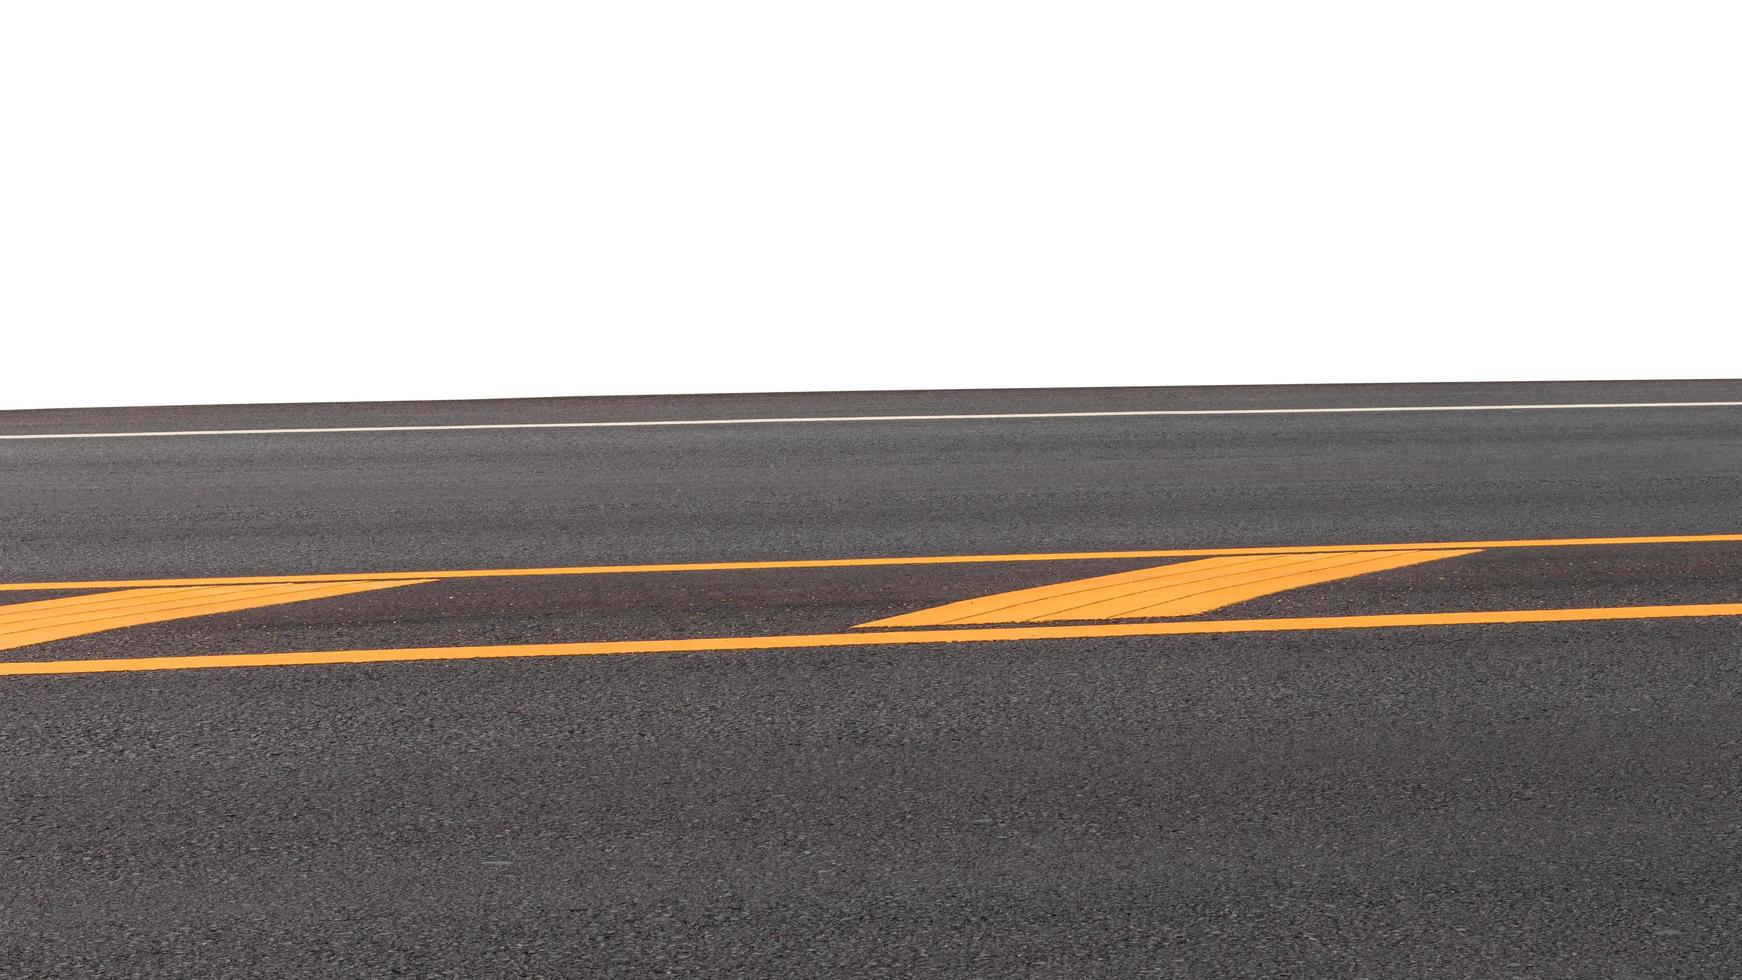 New asphalt road background with yellow lines. photo